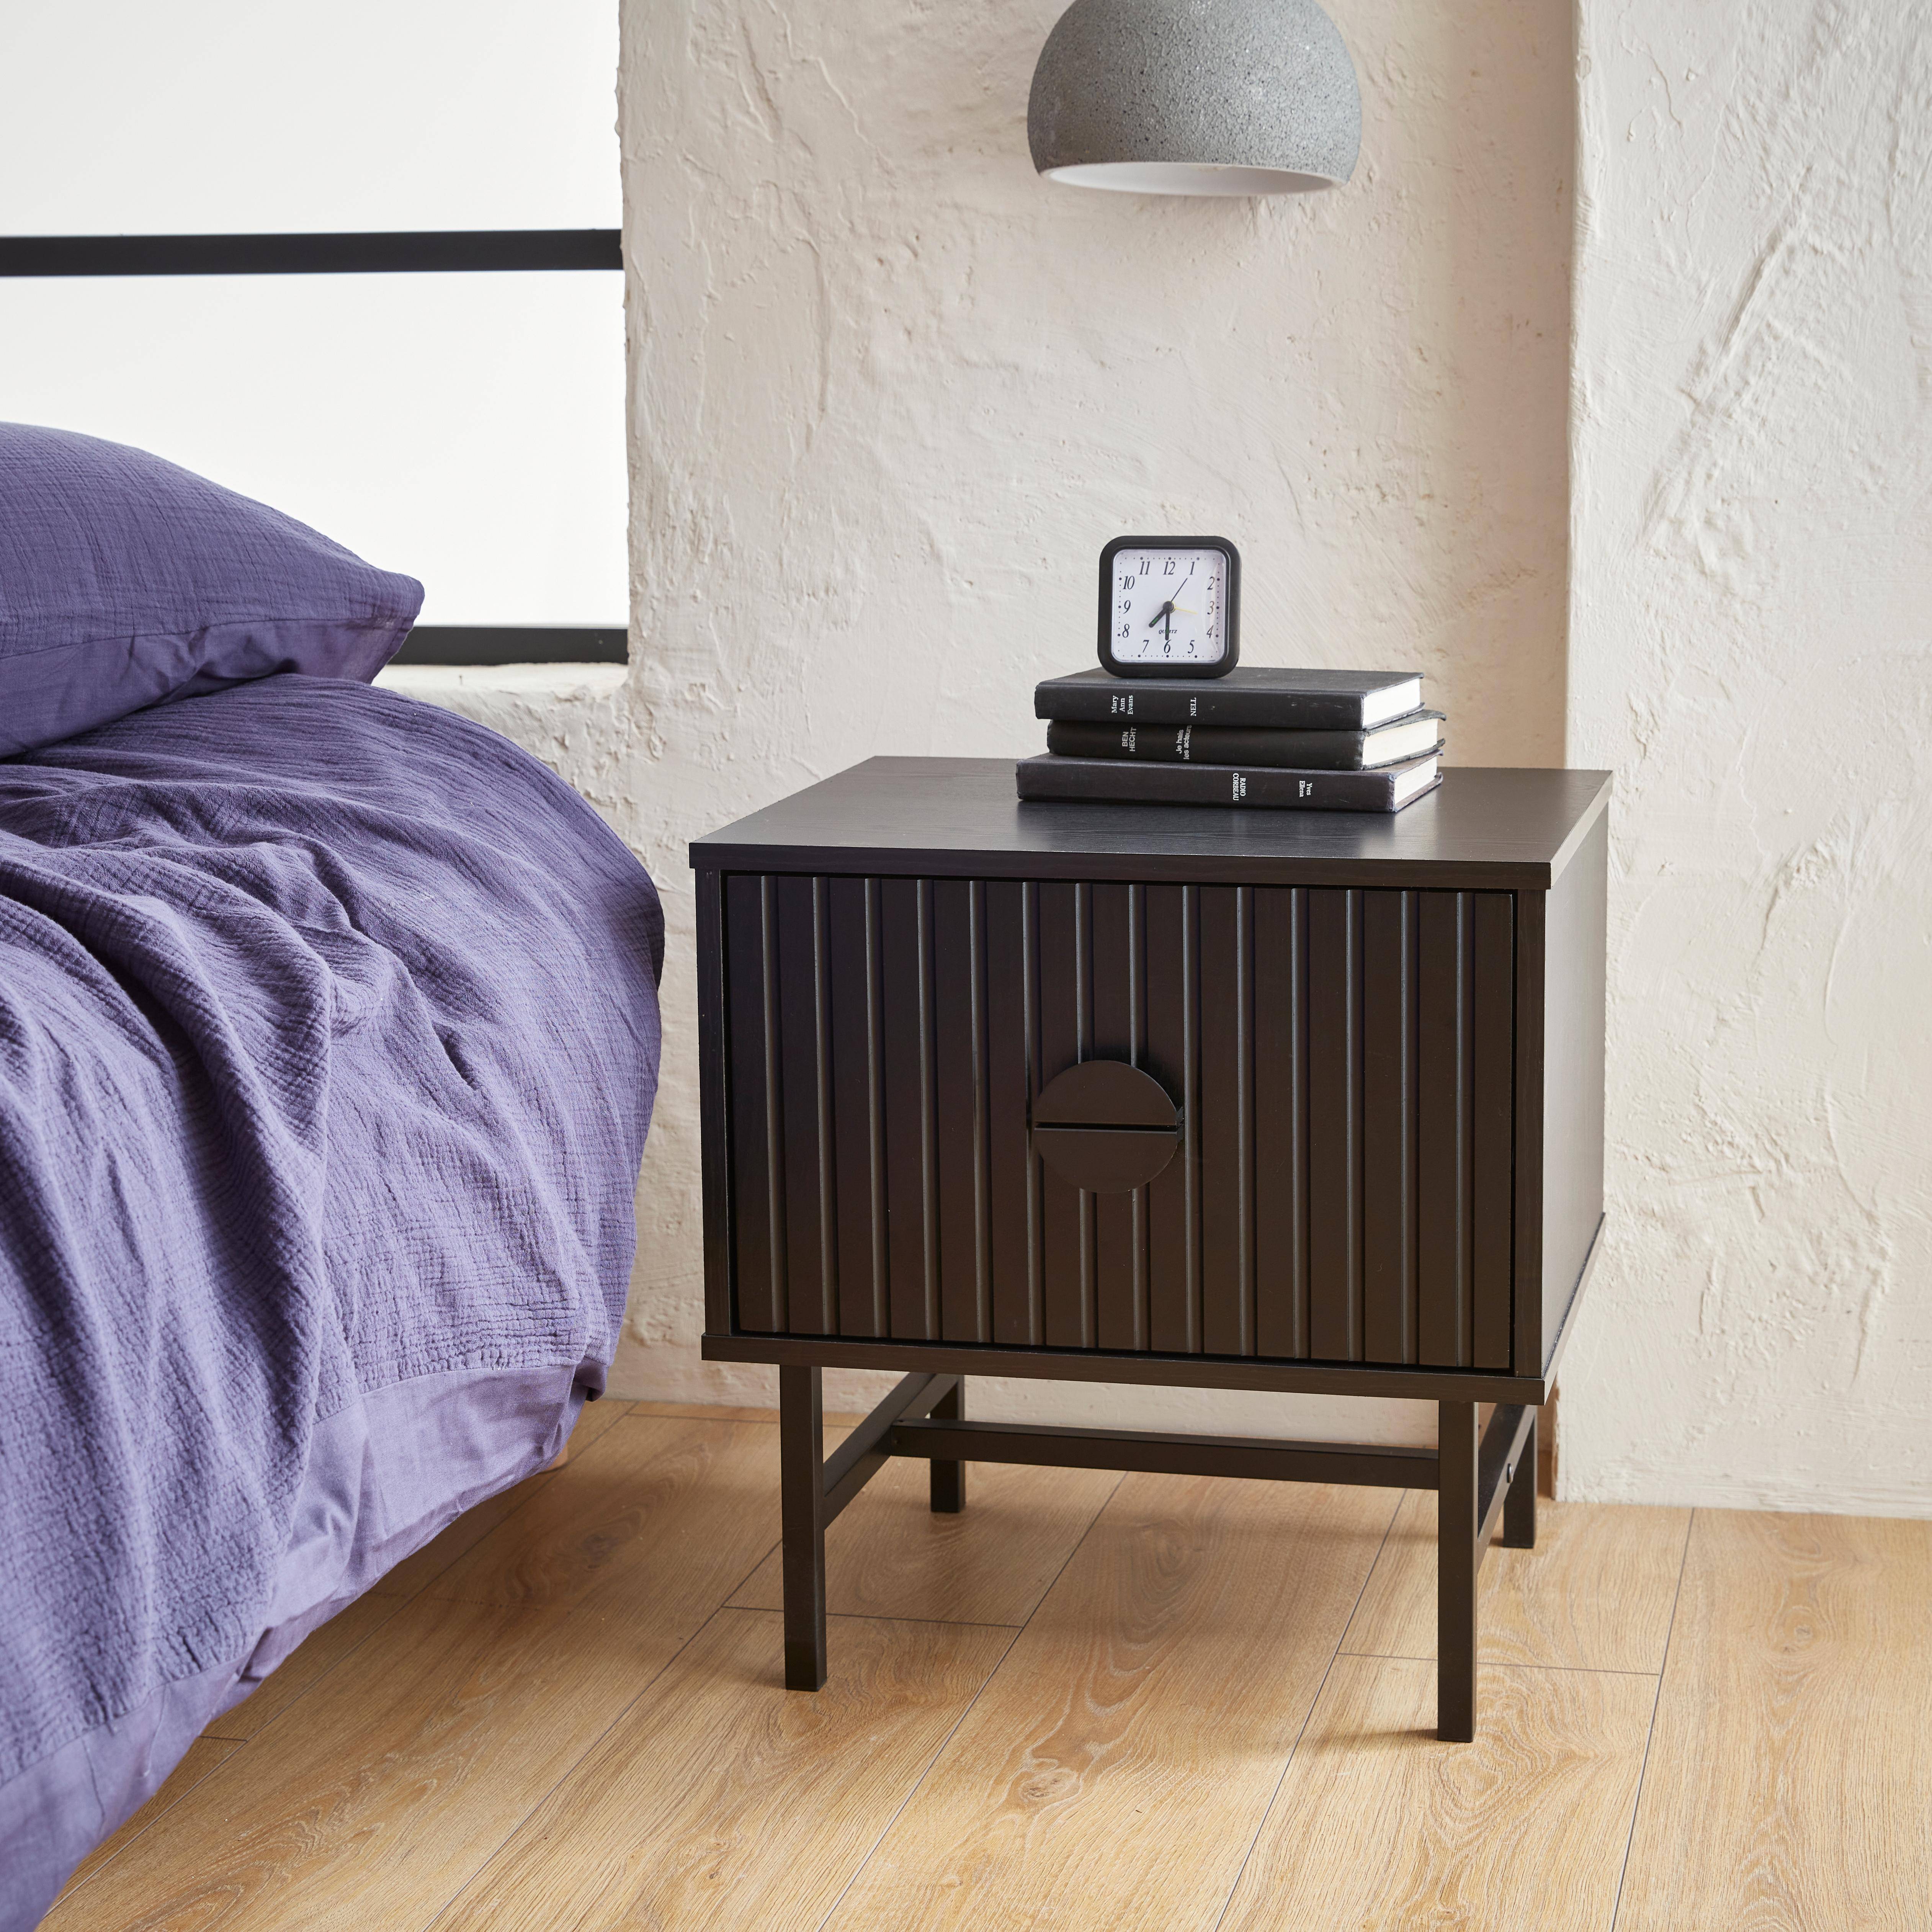 Bedside table with one drawer, ridged effect, industrial style, 48x39x50.3cm - Bazalt - Black Photo1